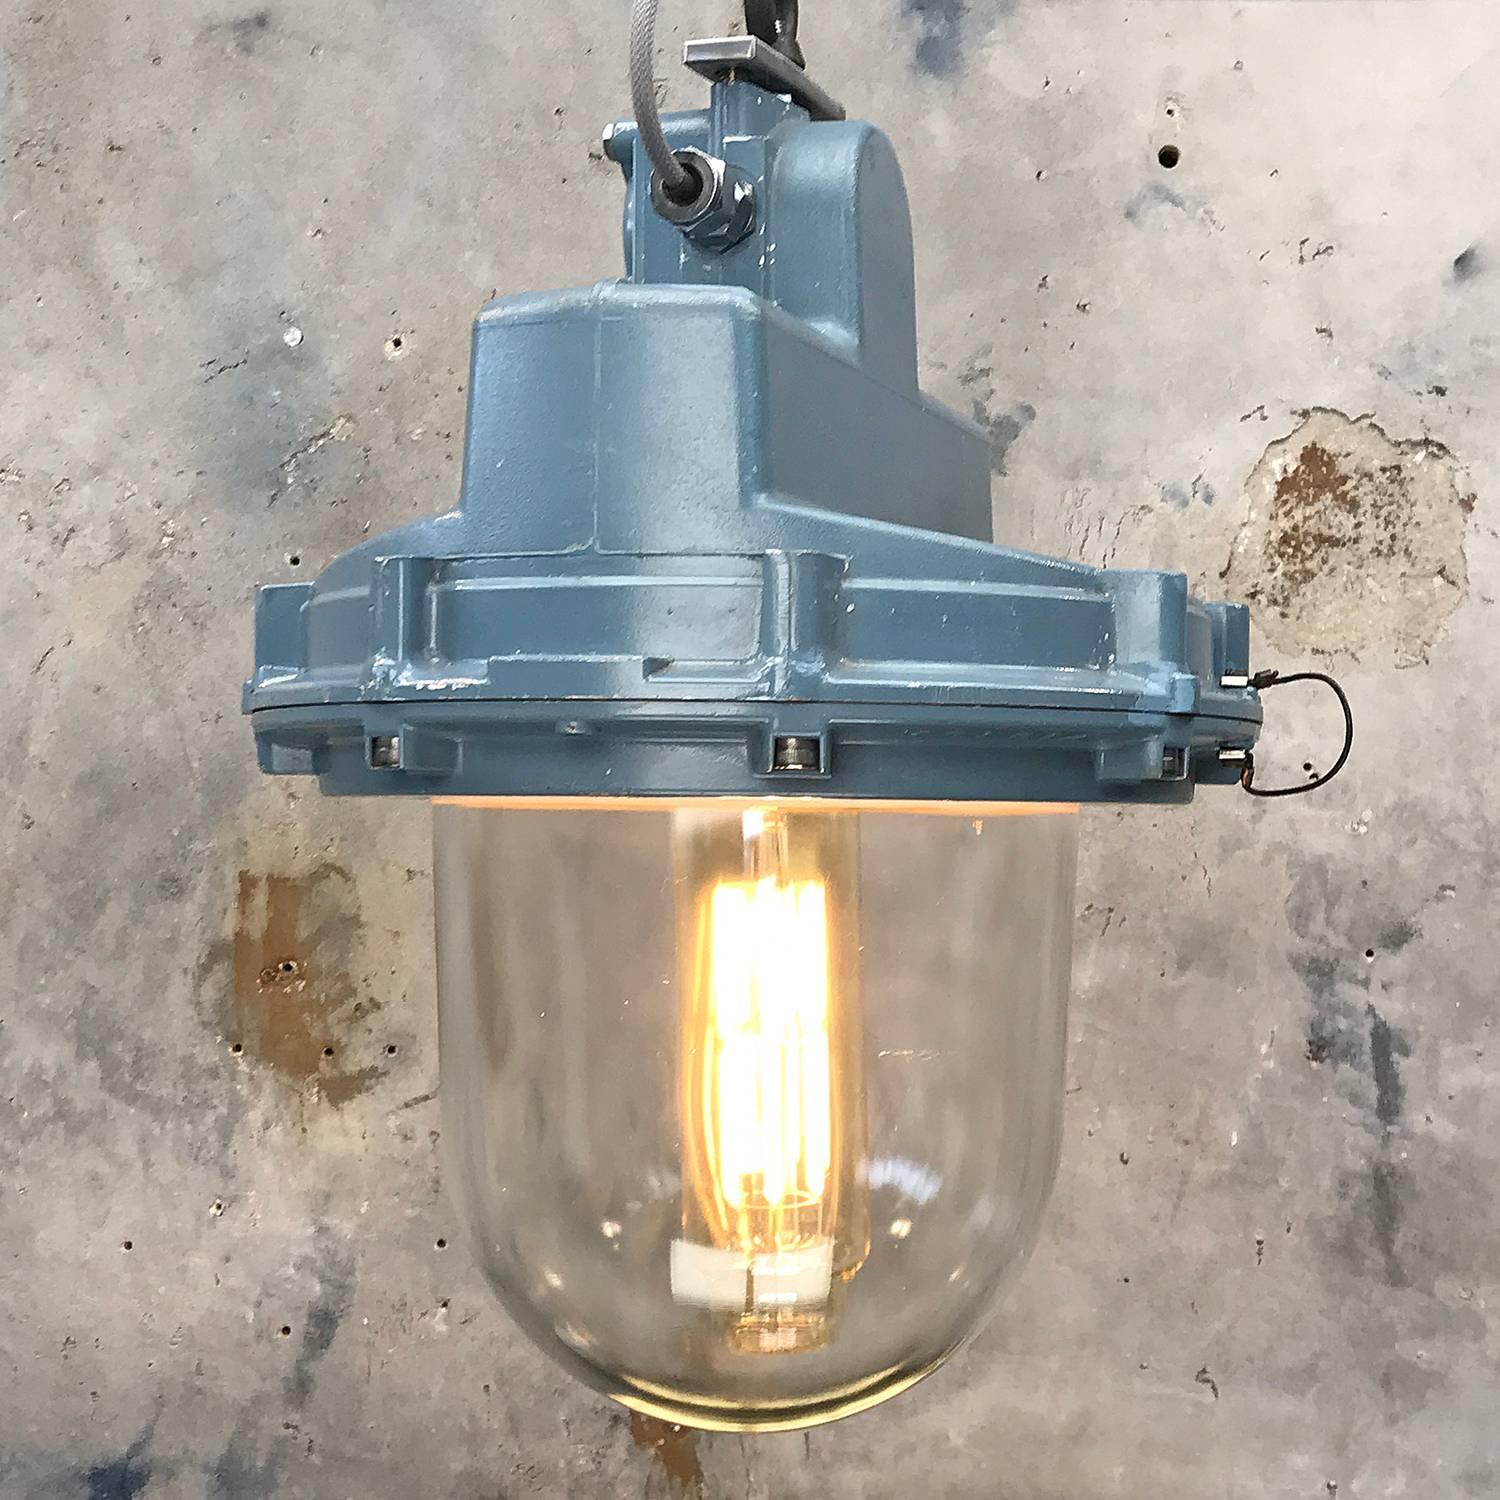 Victor Ex class pendant lighting reclaimed from an oil rig and used to illuminate hazardous areas.

Original blue paint finish.

British made in the 1950s, a substantial glass dome and two part aluminium enclosure originally housing a sodium